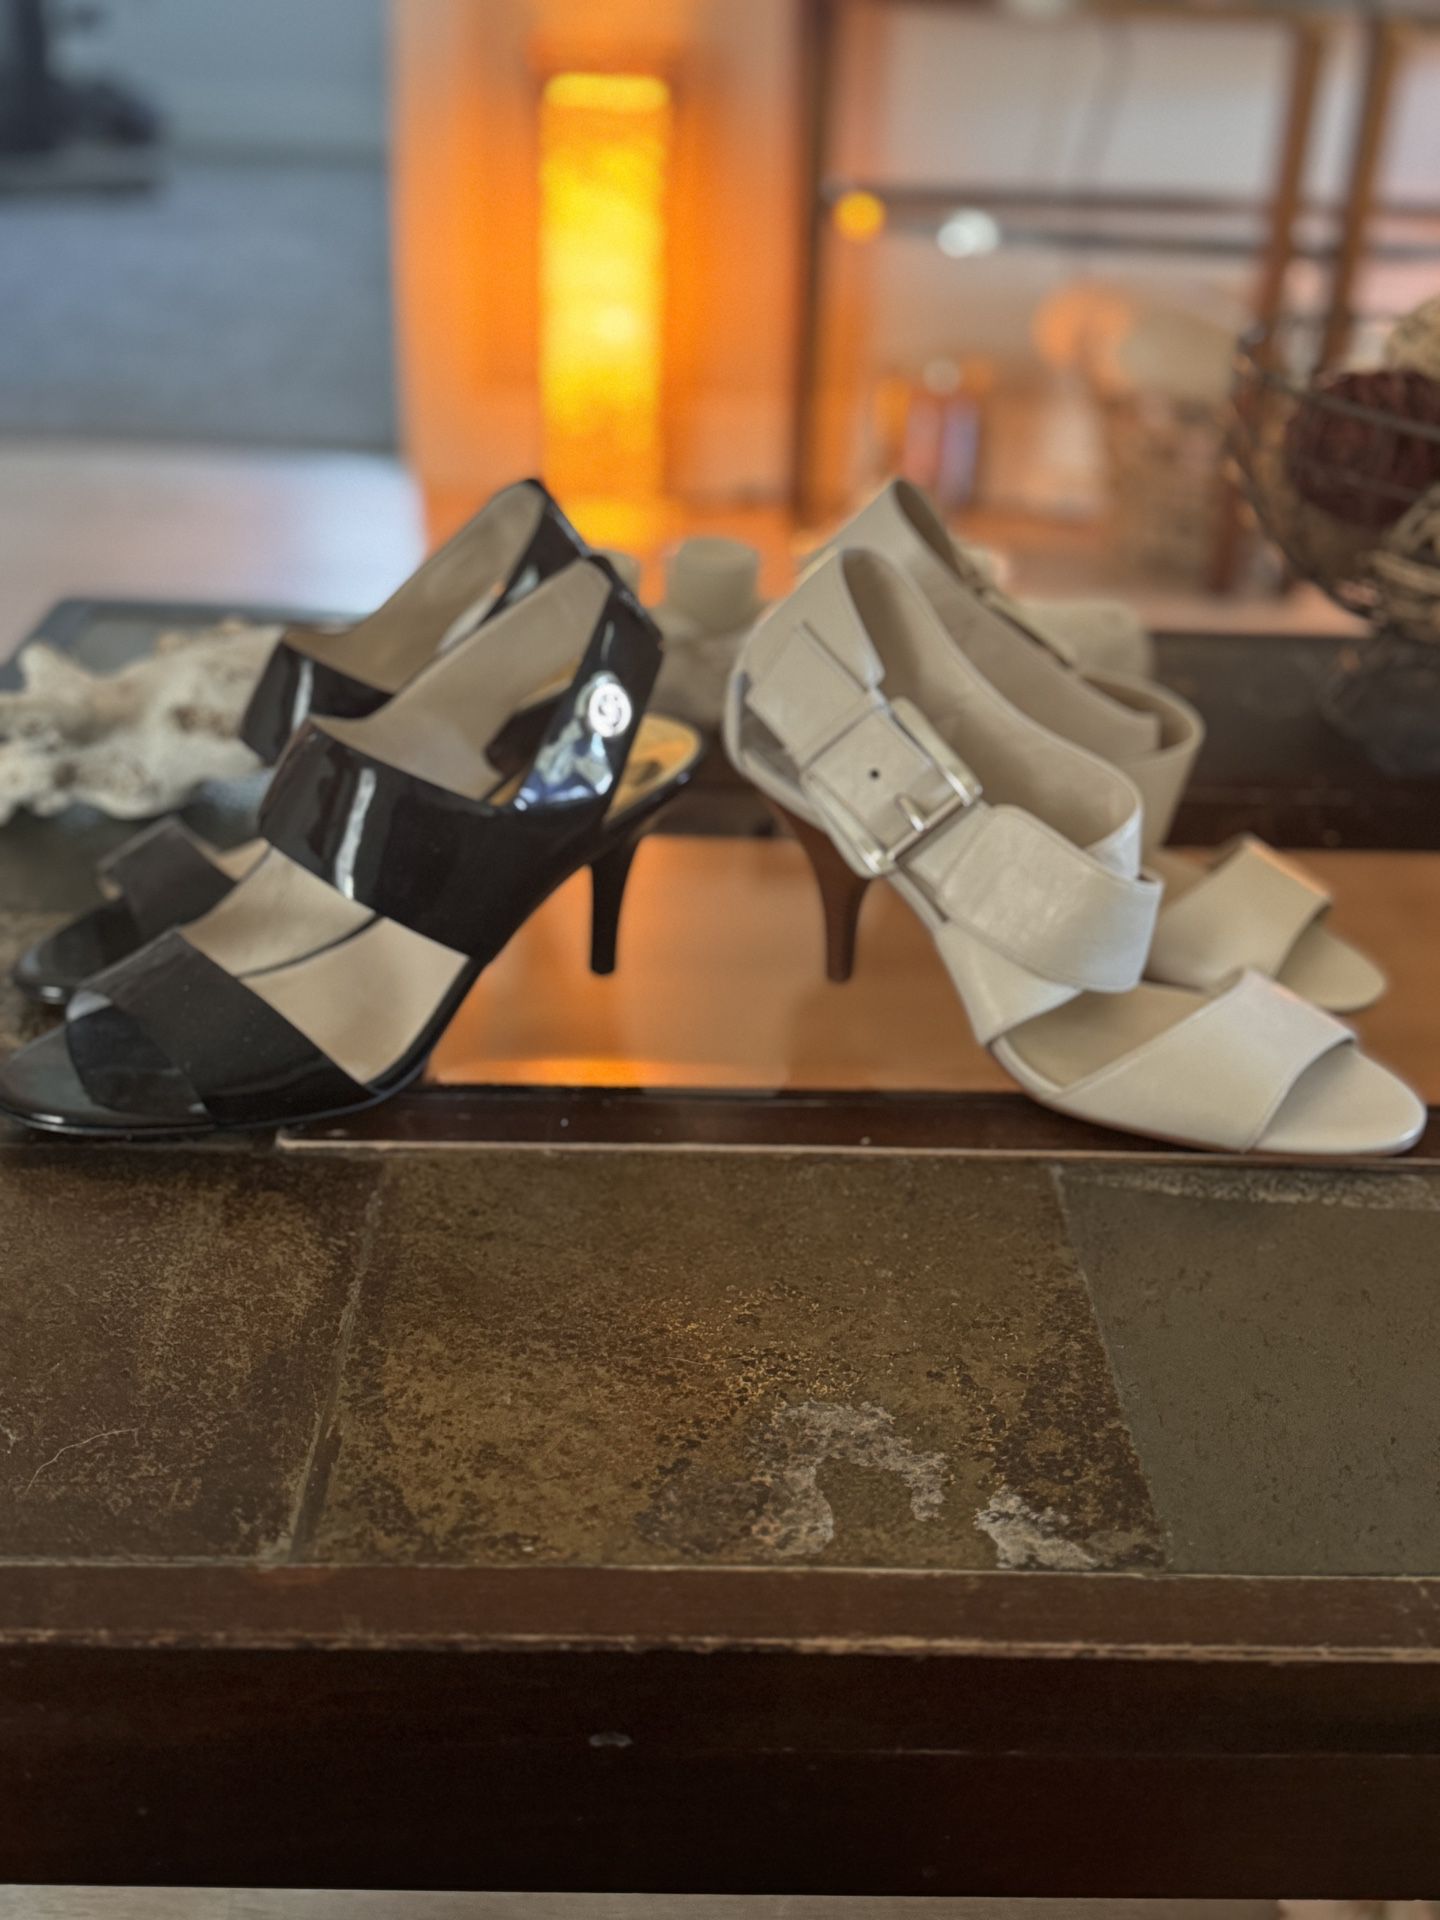 Michael Kors High Heel Sandals Both Size 8, Shiny Black With Gold Accents, White/cream With Silver Accent And Buckle With Wood Grain Heel